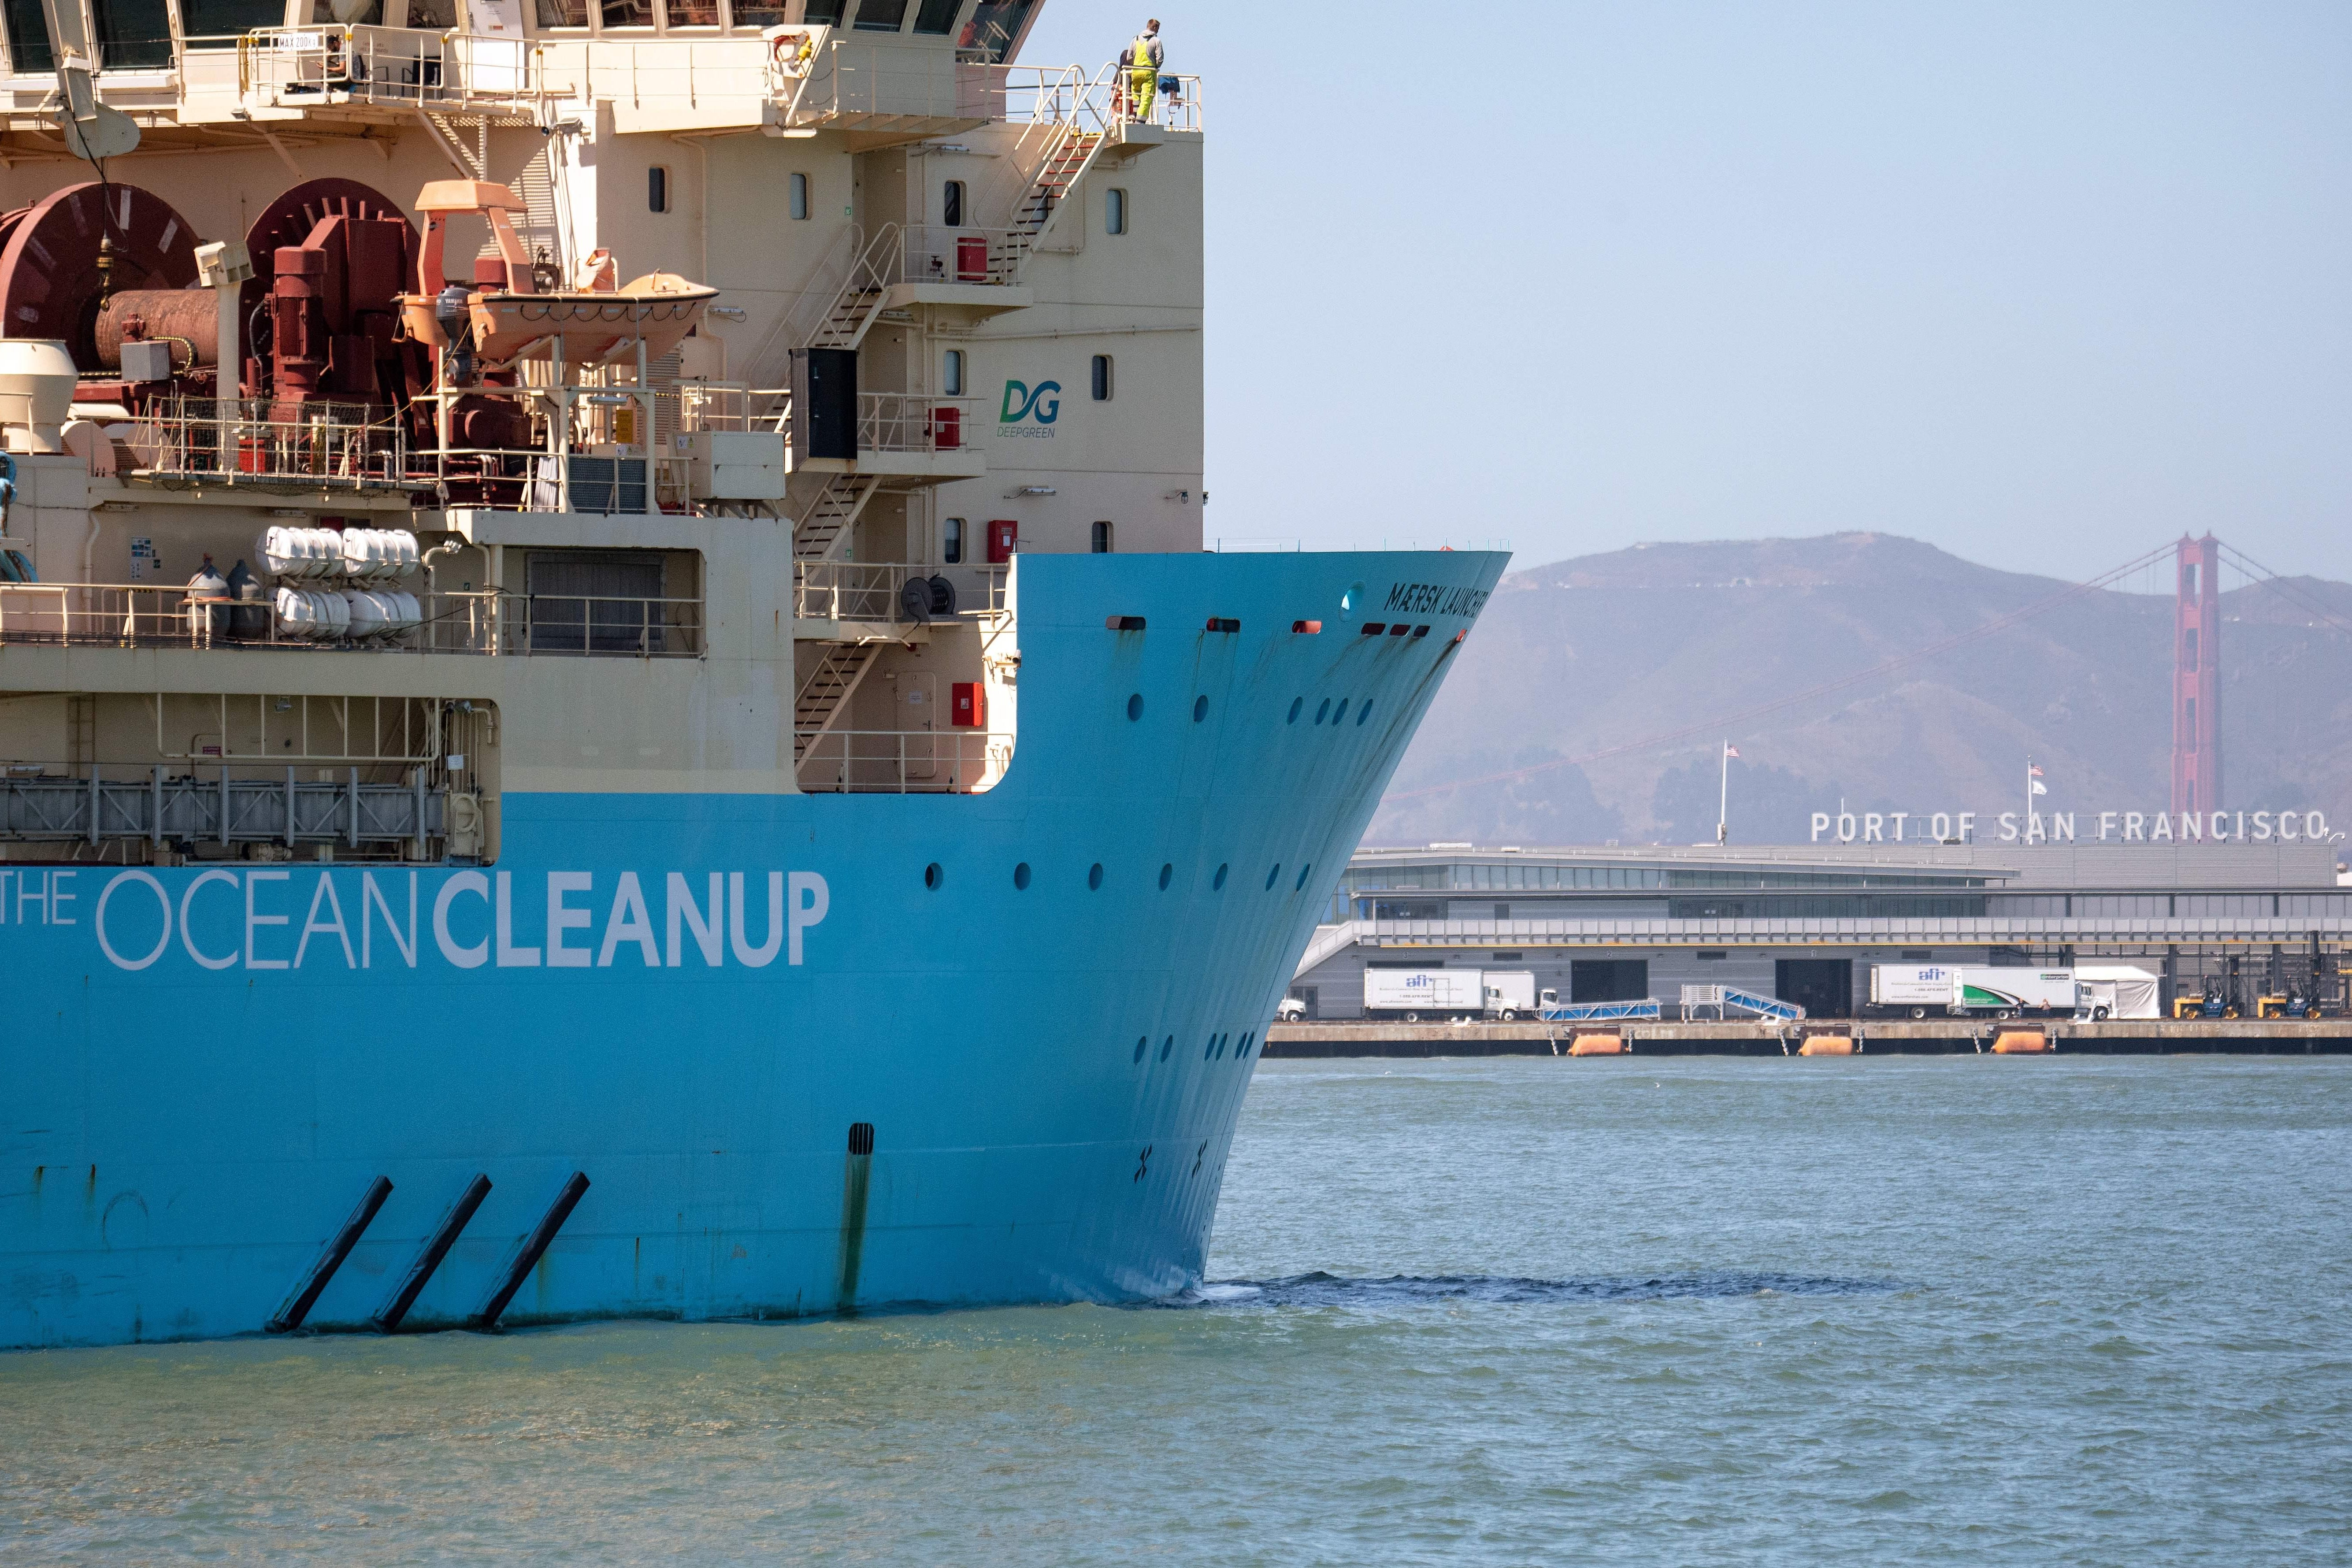 A blue vessel painted with the words "Ocean Cleanup" on the ocean, near the Port of San Francisco.